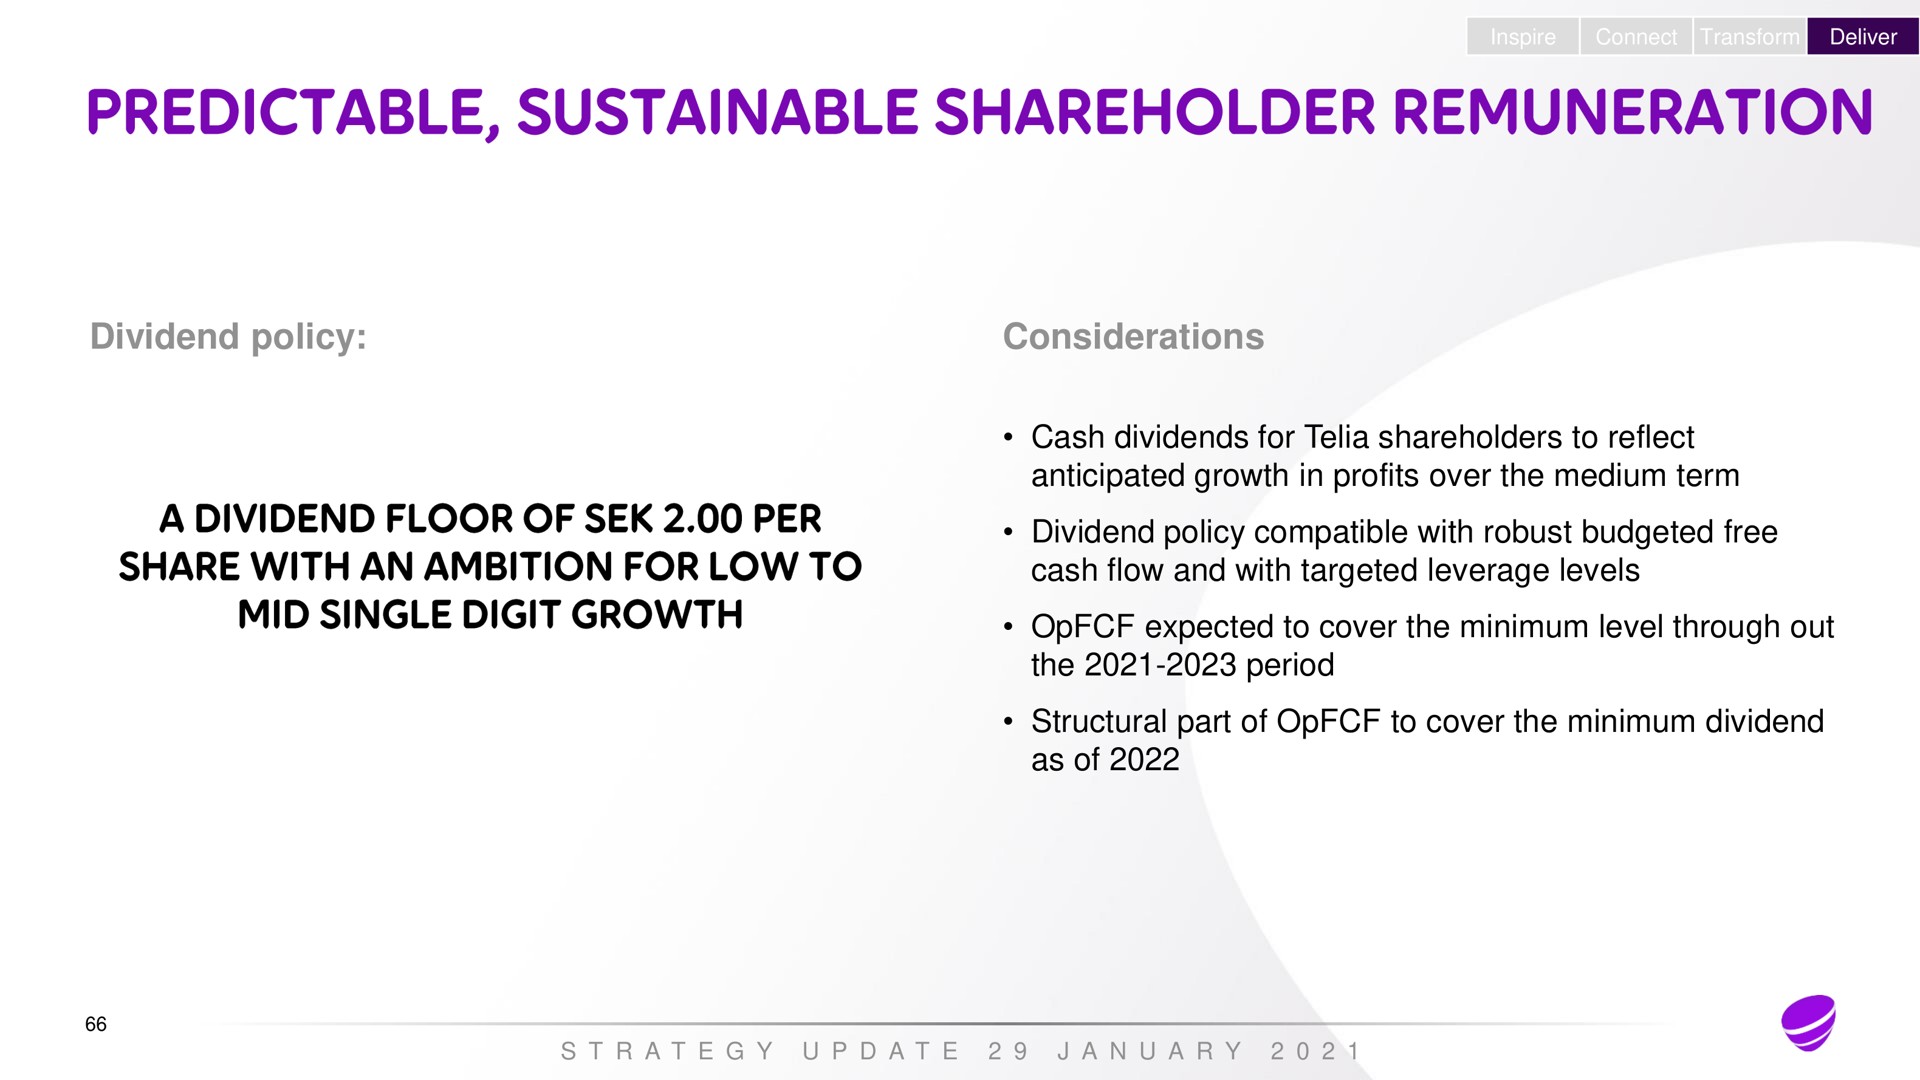 inspire connect transform deliver dividend policy considerations cash dividends for shareholders to reflect anticipated growth in profits over the medium term dividend policy compatible with robust budgeted free cash flow and with targeted leverage levels expected to cover the minimum level through out the period structural part of to cover the minimum dividend as of a a a a | Telia Company